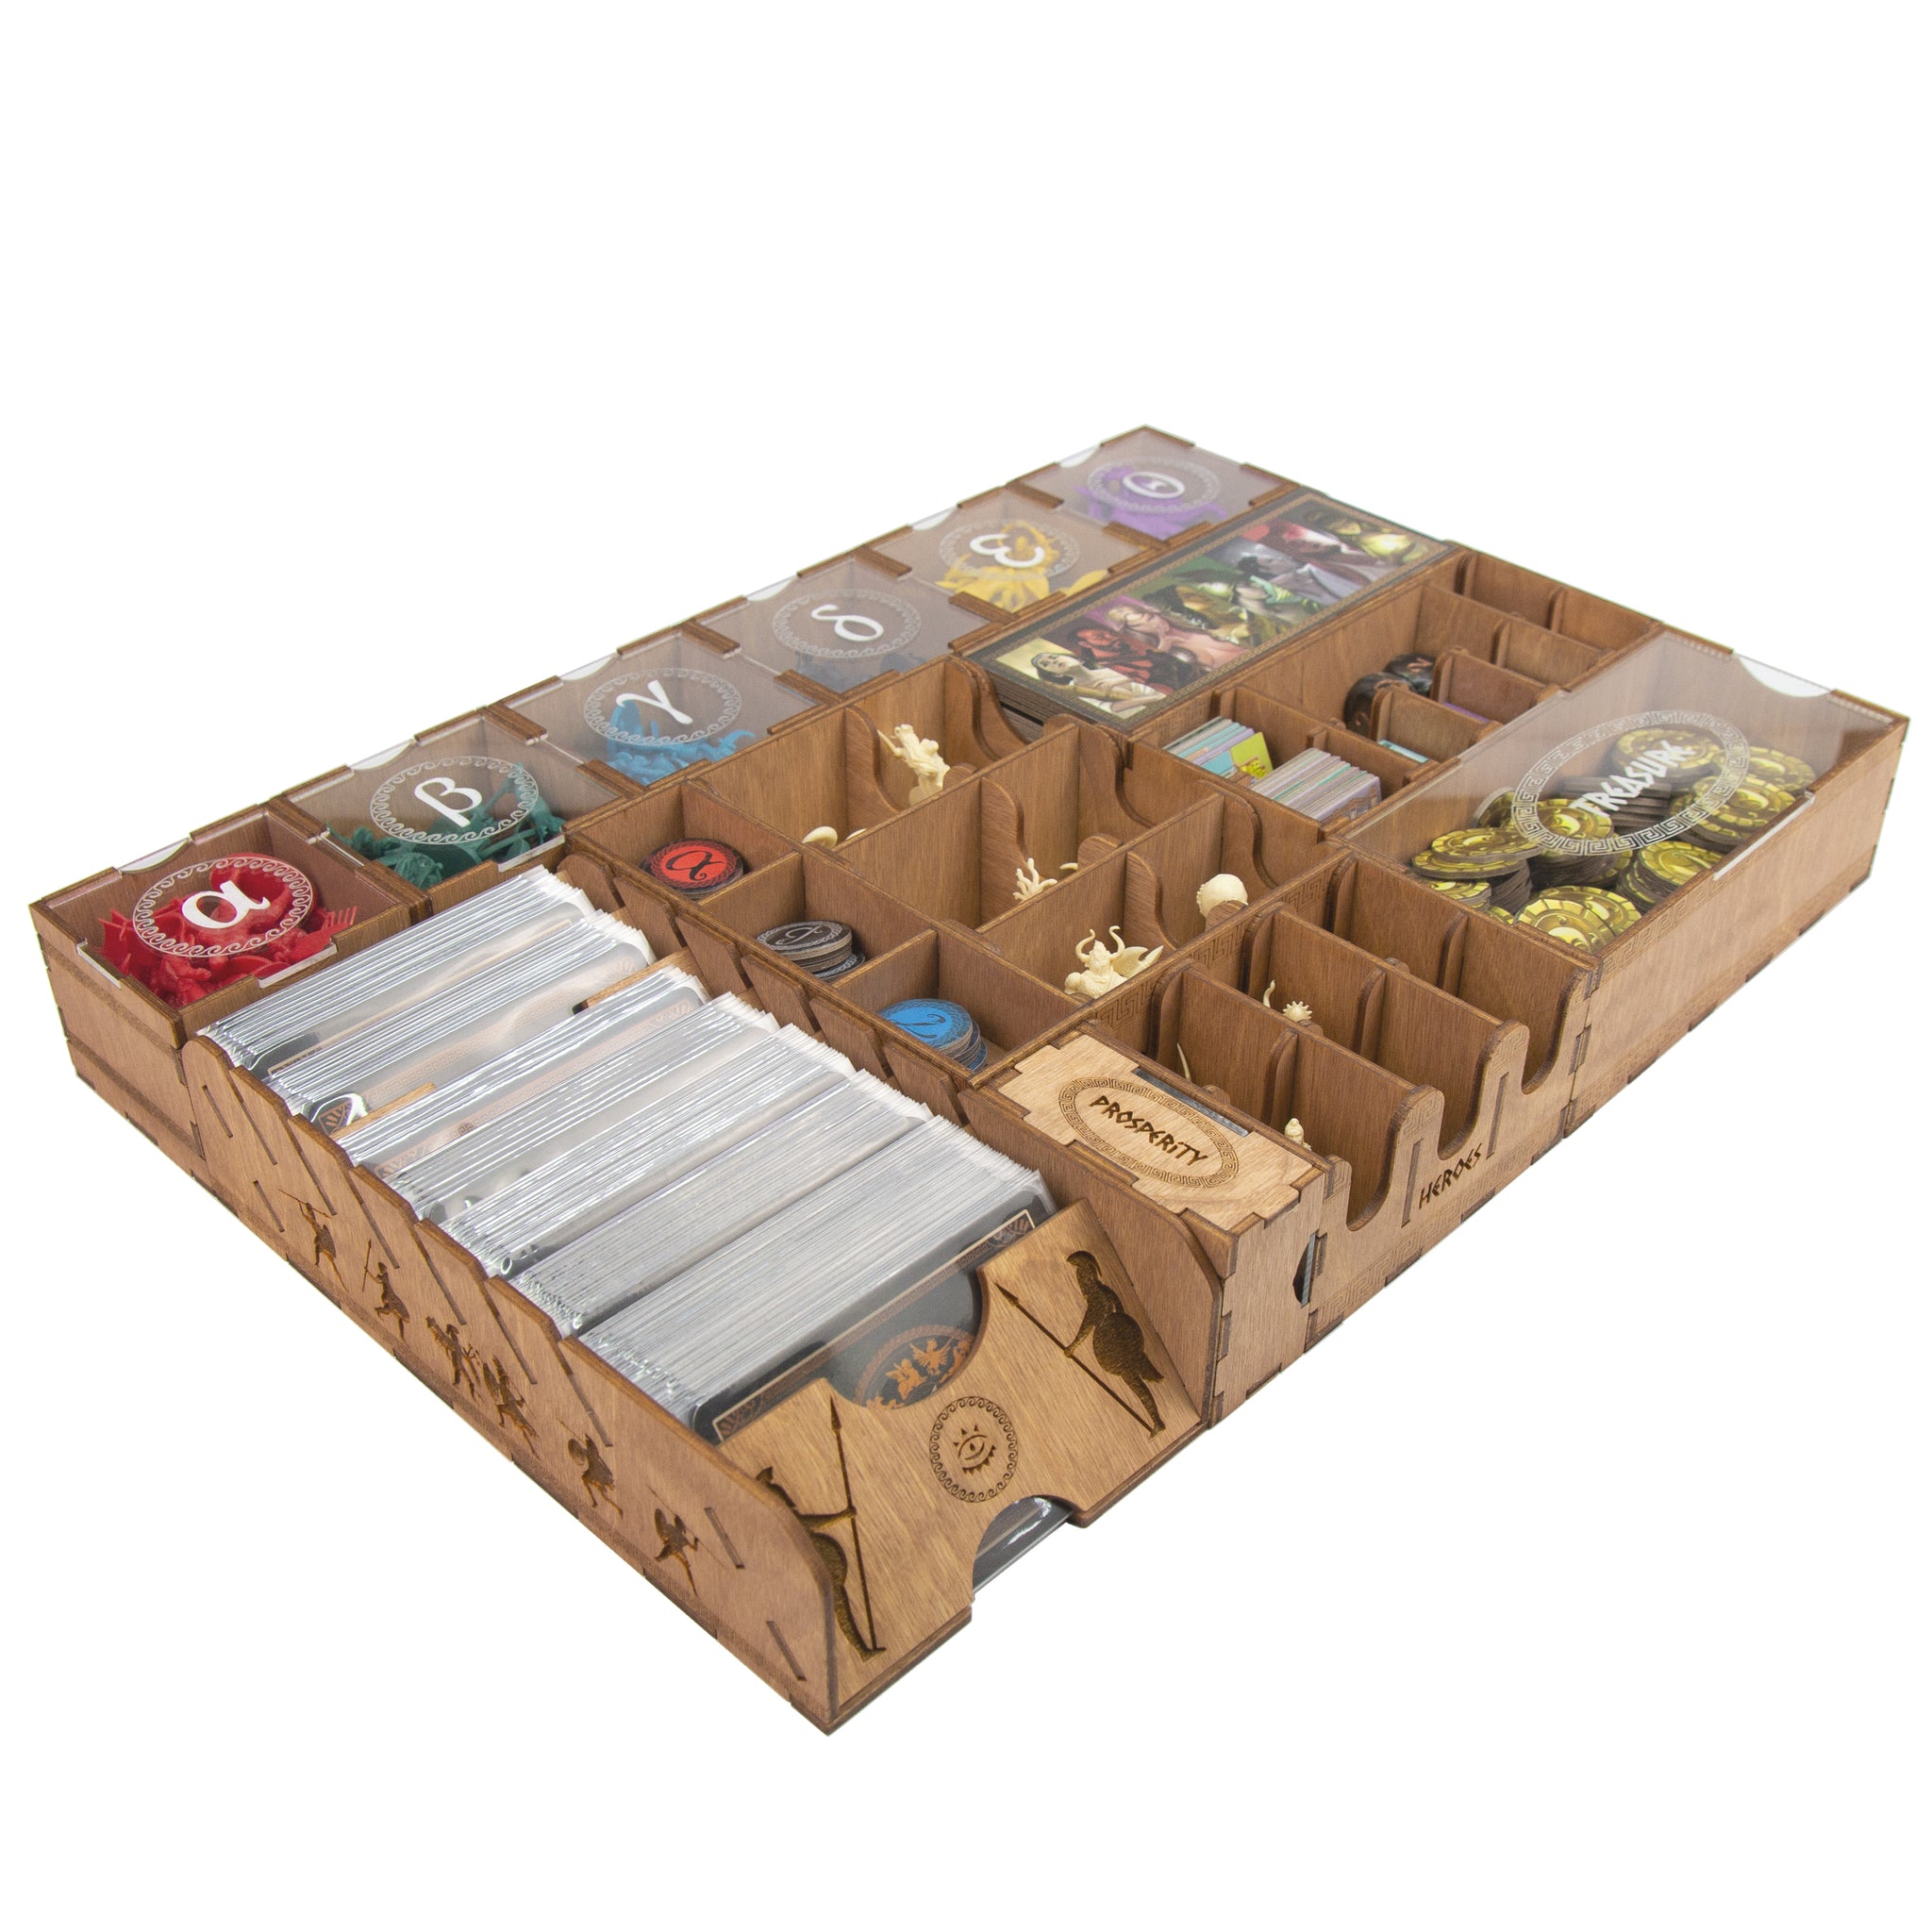 Gloomhaven Organizer Made of Wood - Compatible with Base Game and Forg –